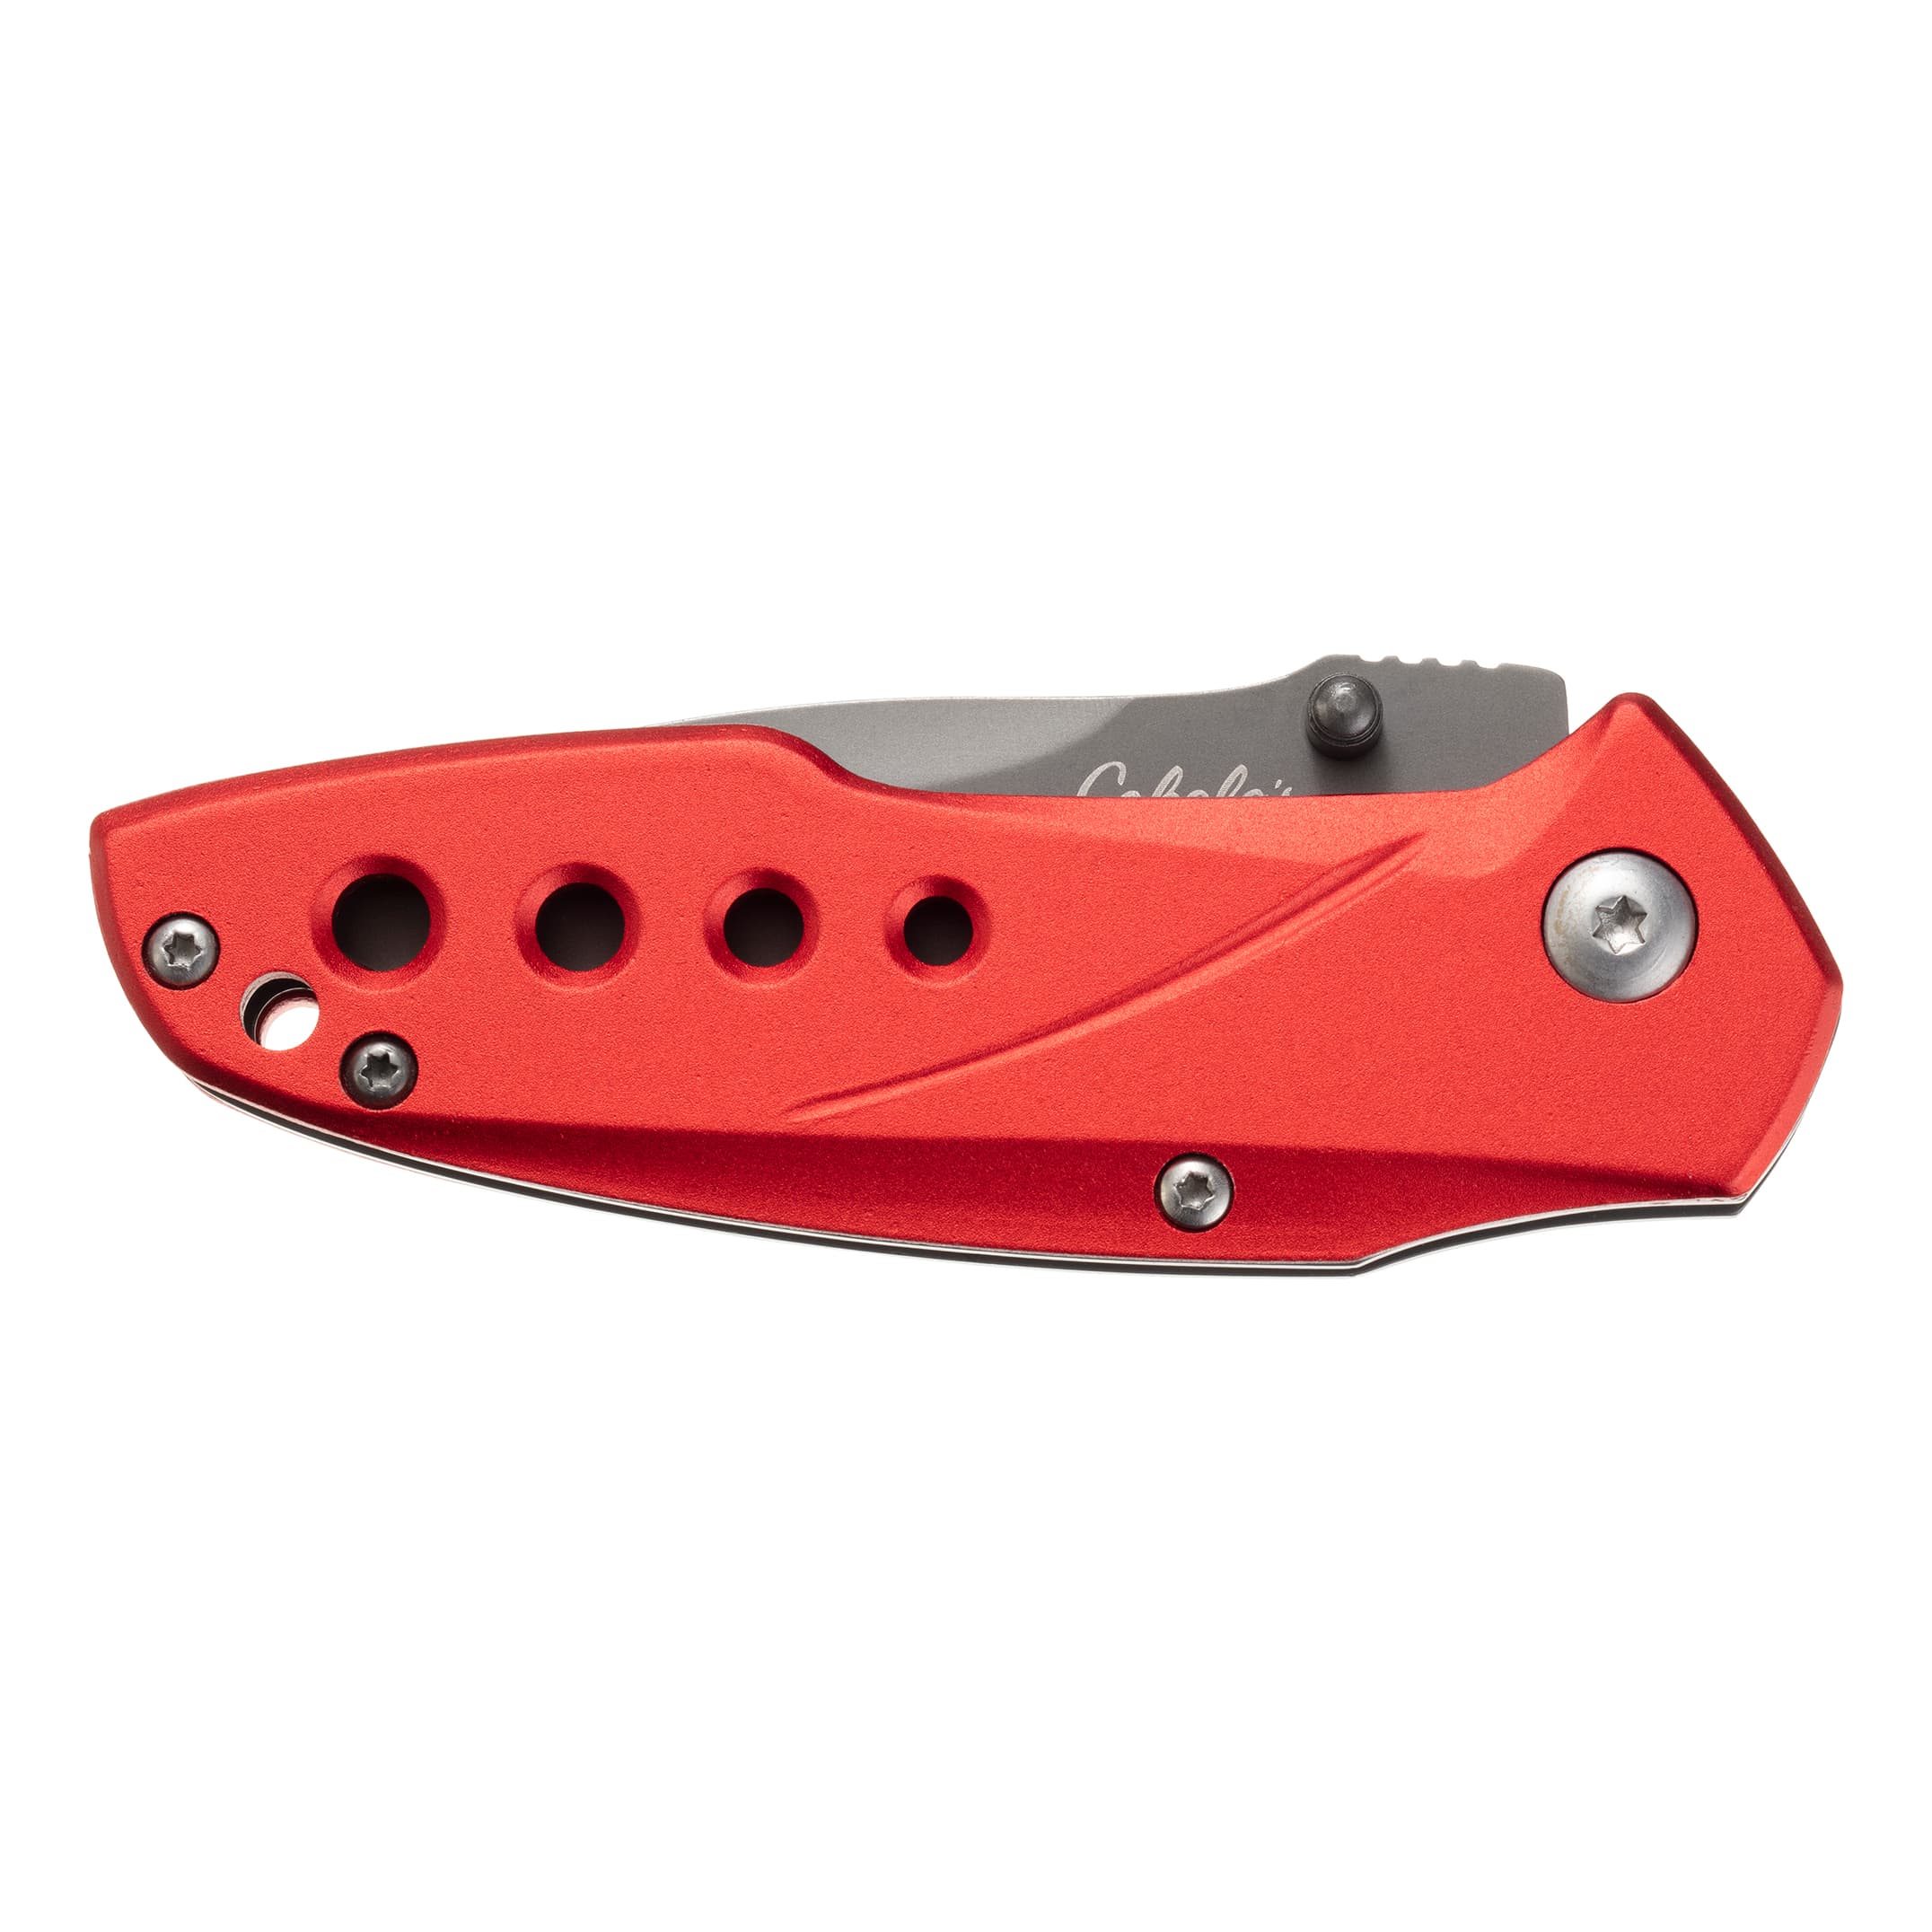 Cabela's Small Folding Knife - Red - Closed